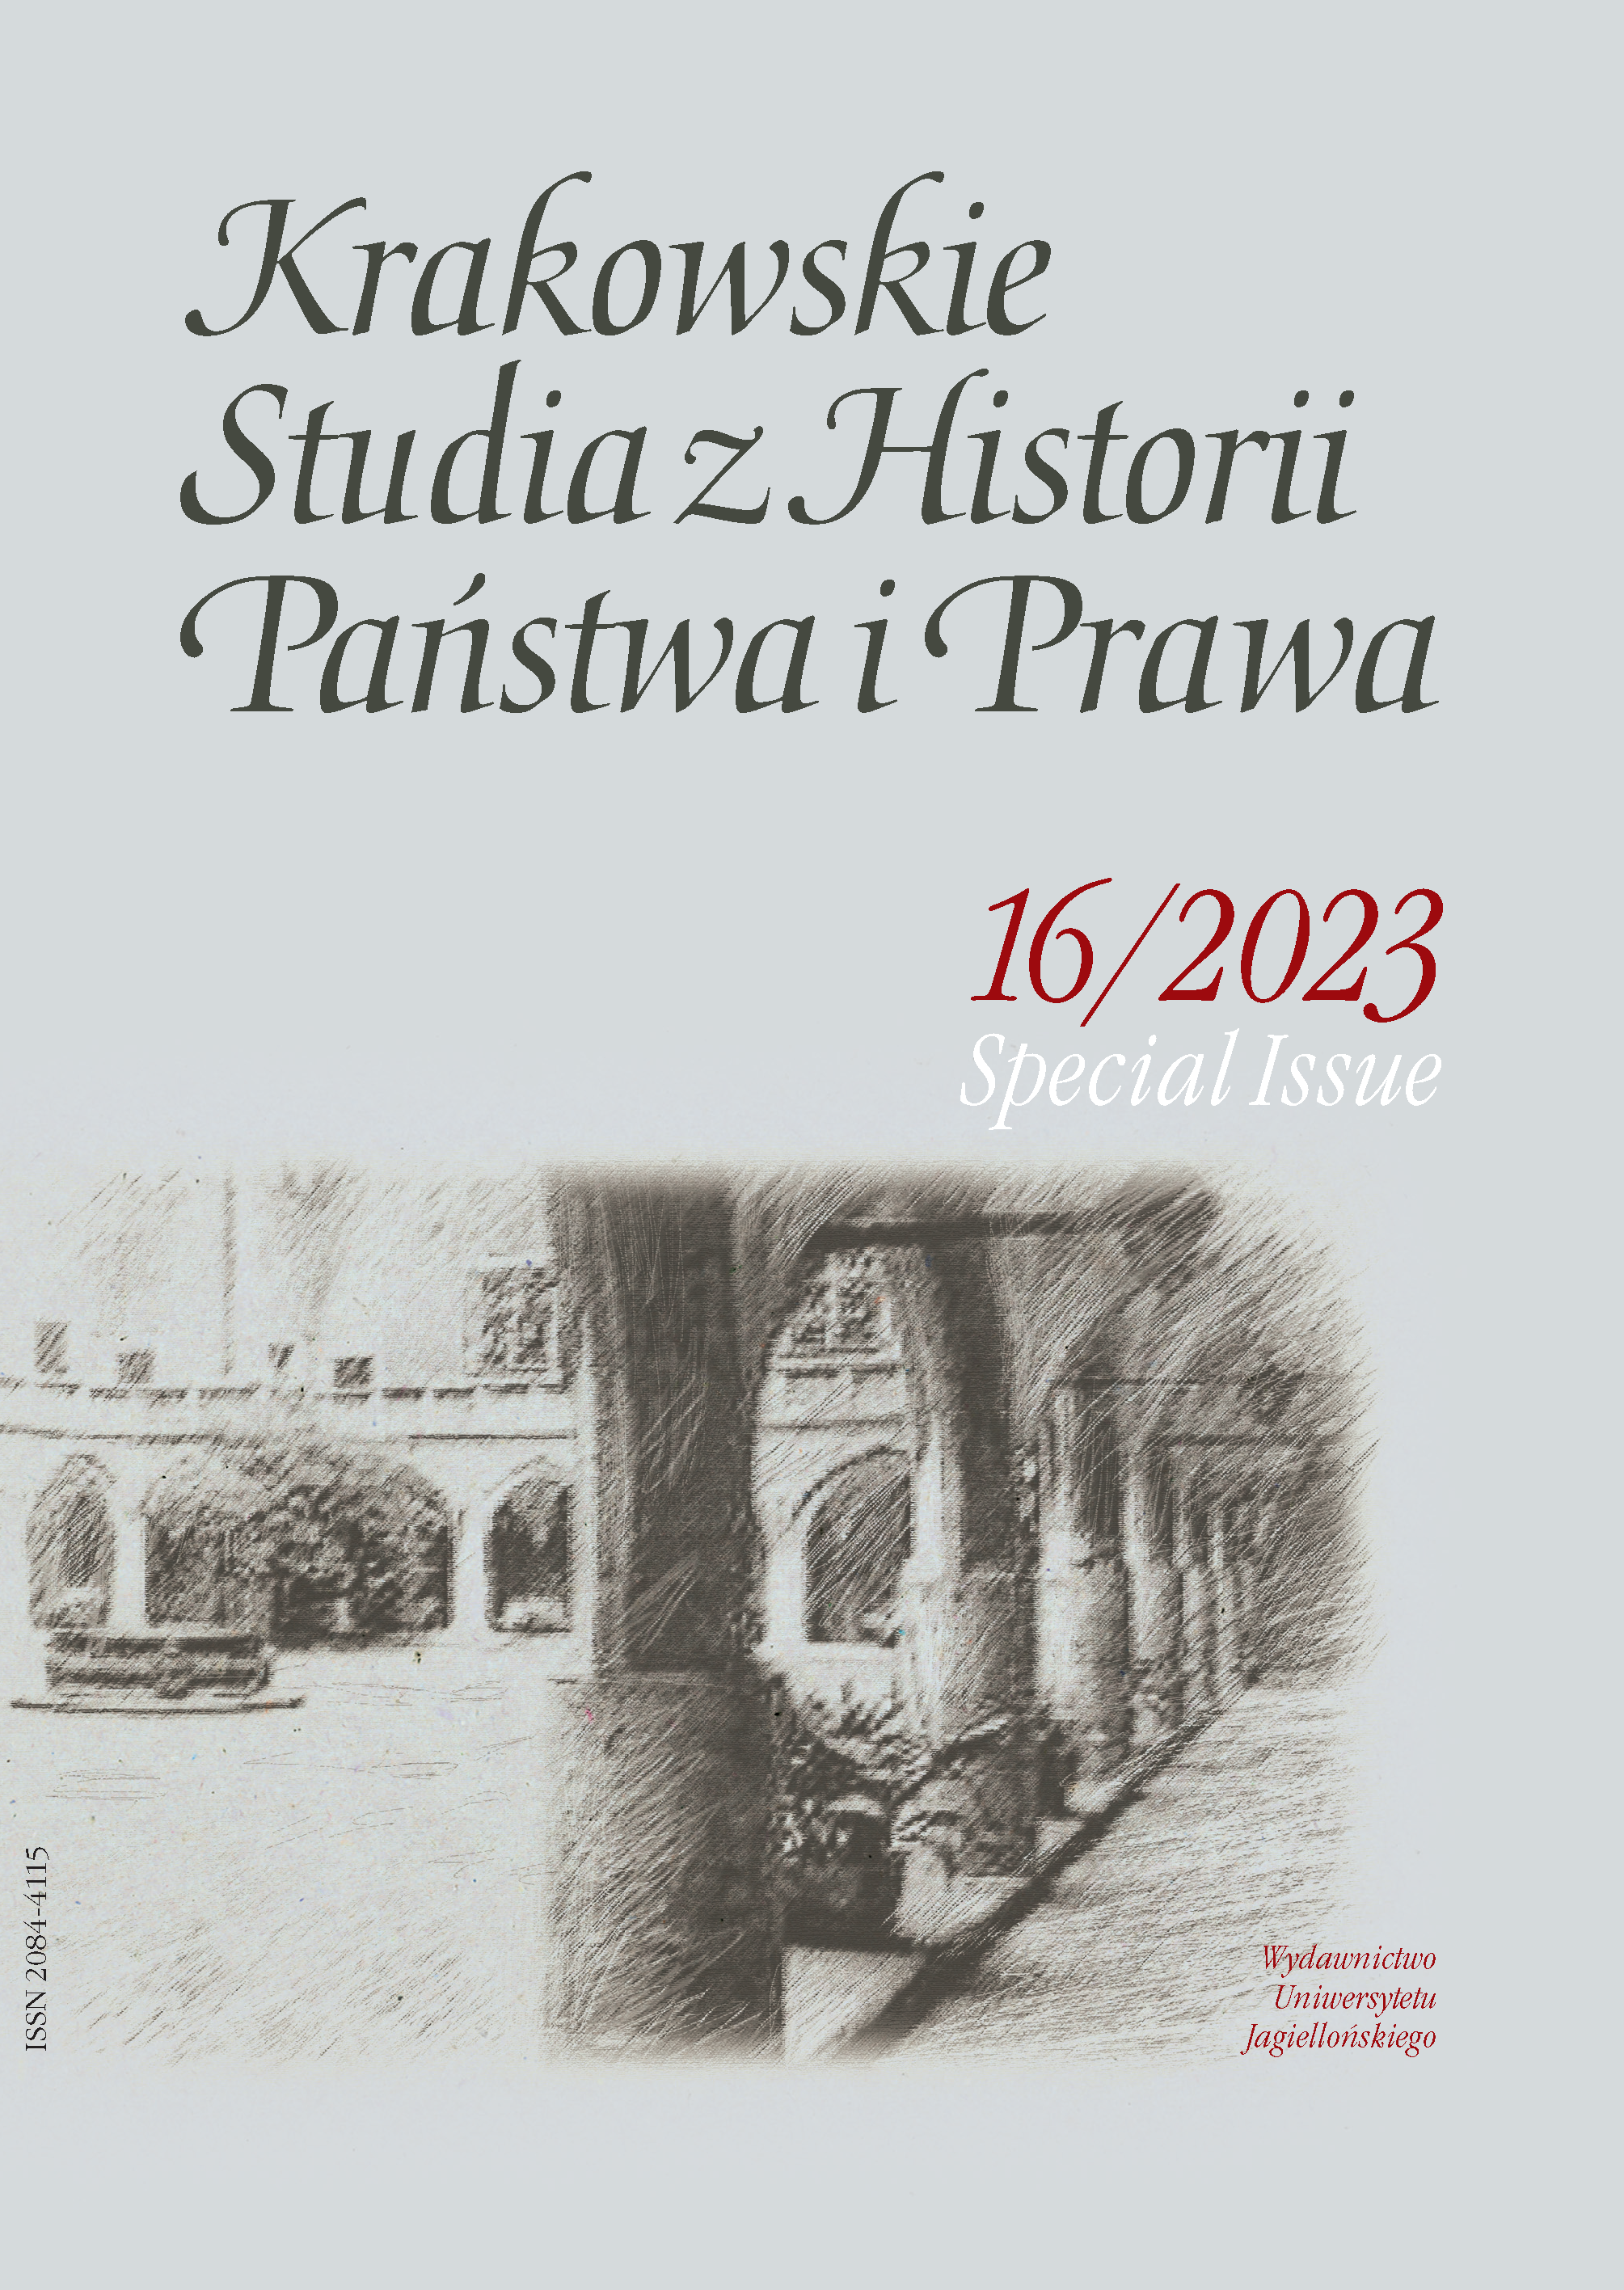 Was the Constitution of 3 May 1791 a Source of Inspiration for 19th Century Polish Constitutional Drafts? The Problem of Using Polish Constitutional Heritage in the Congress Kingdom of Poland in 1815 and 1831 Cover Image